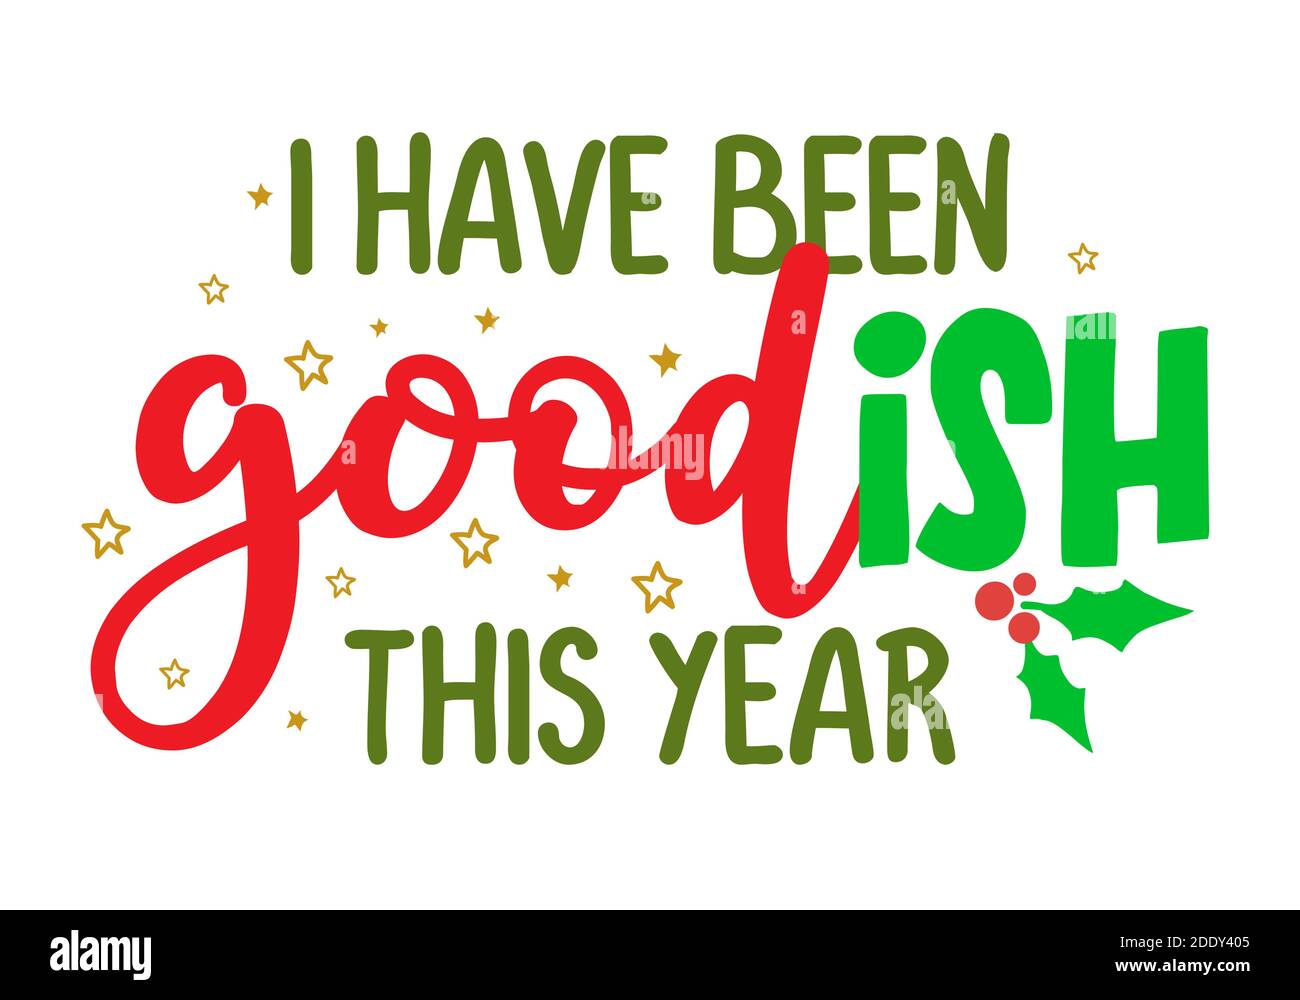 I have been goodish this year - Calligraphy phrase for Christmas. Hand drawn lettering for Xmas. Good for t-shirt, mug, gift, greetings cards, invitat Stock Vector